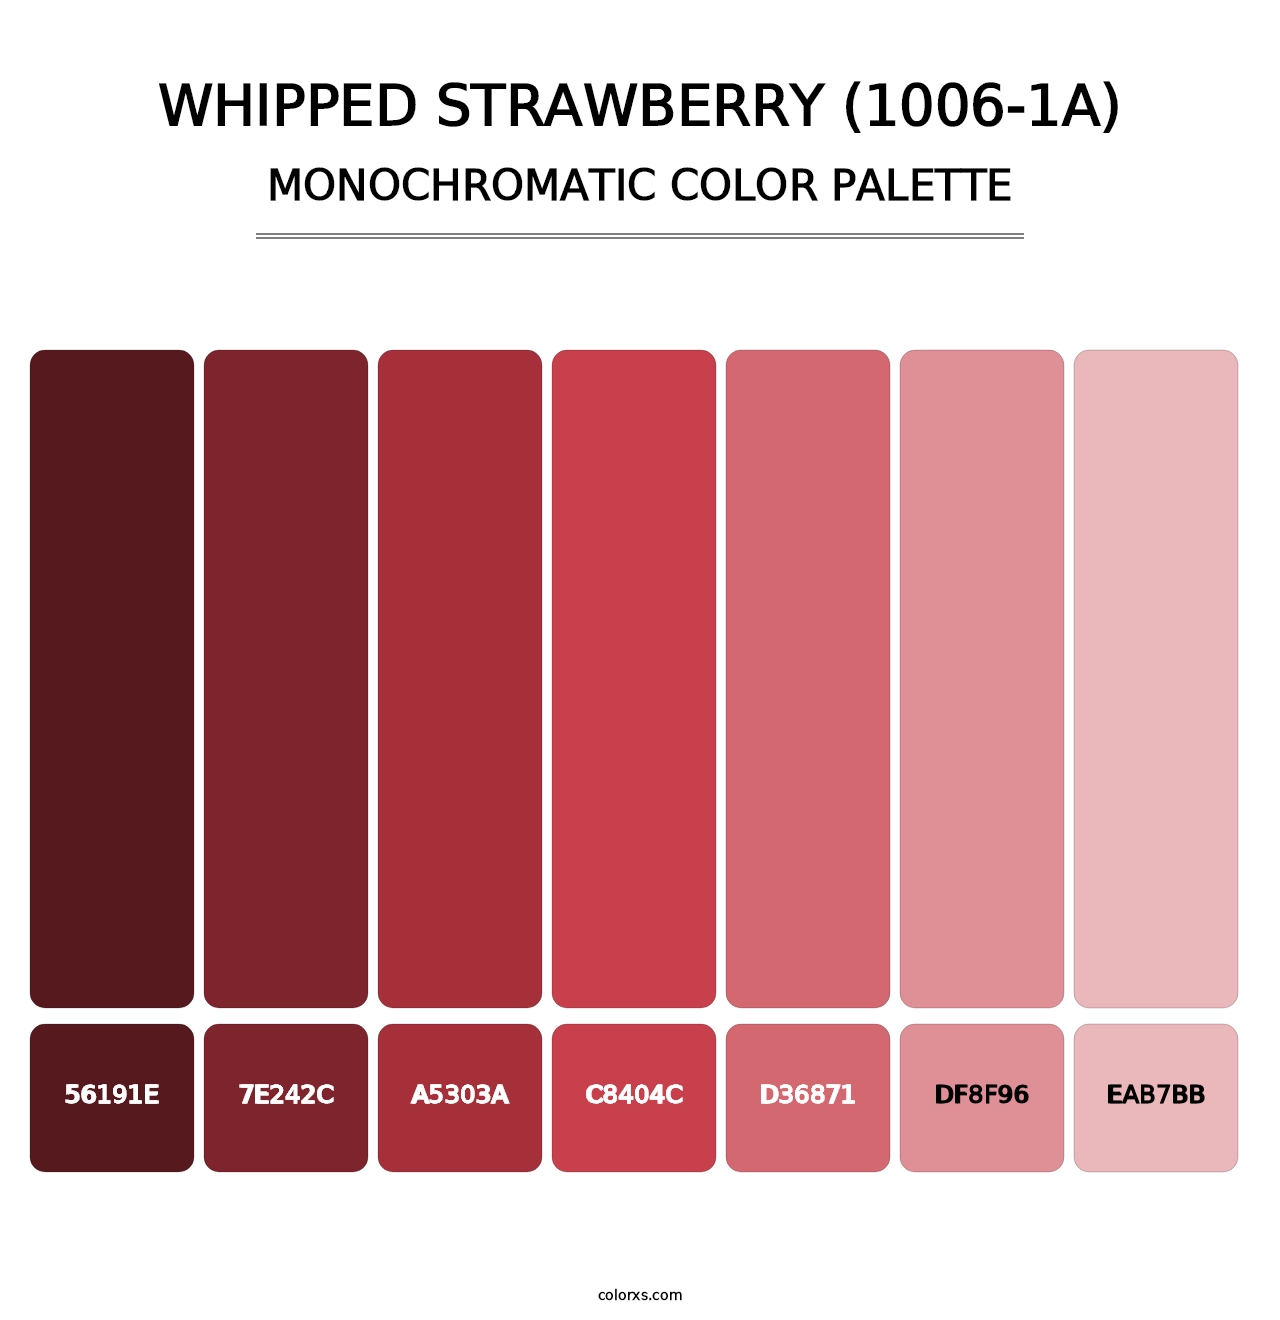 Whipped Strawberry (1006-1A) - Monochromatic Color Palette